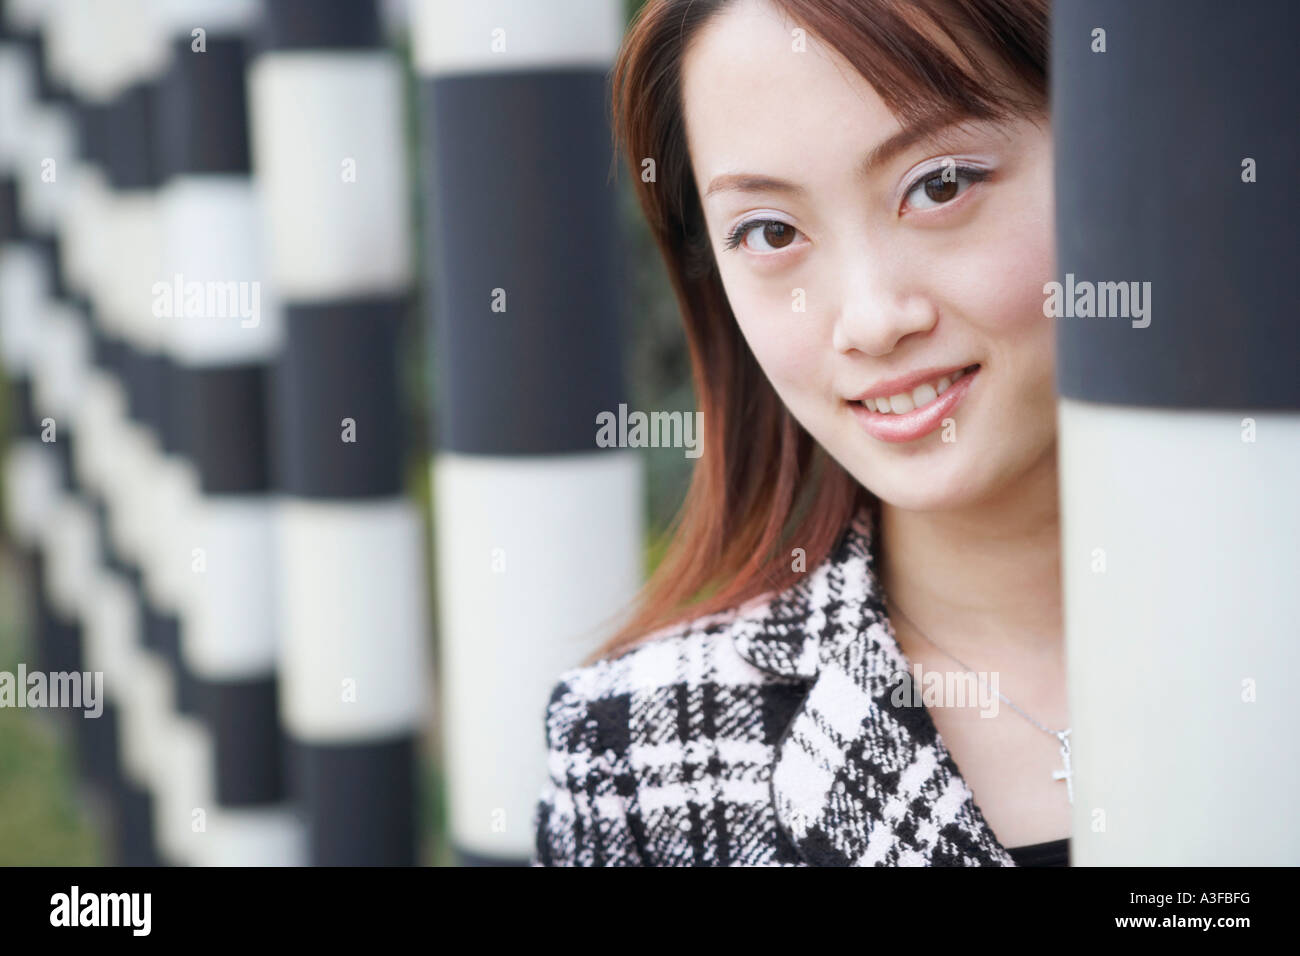 Portrait of a young woman smiling Stock Photo